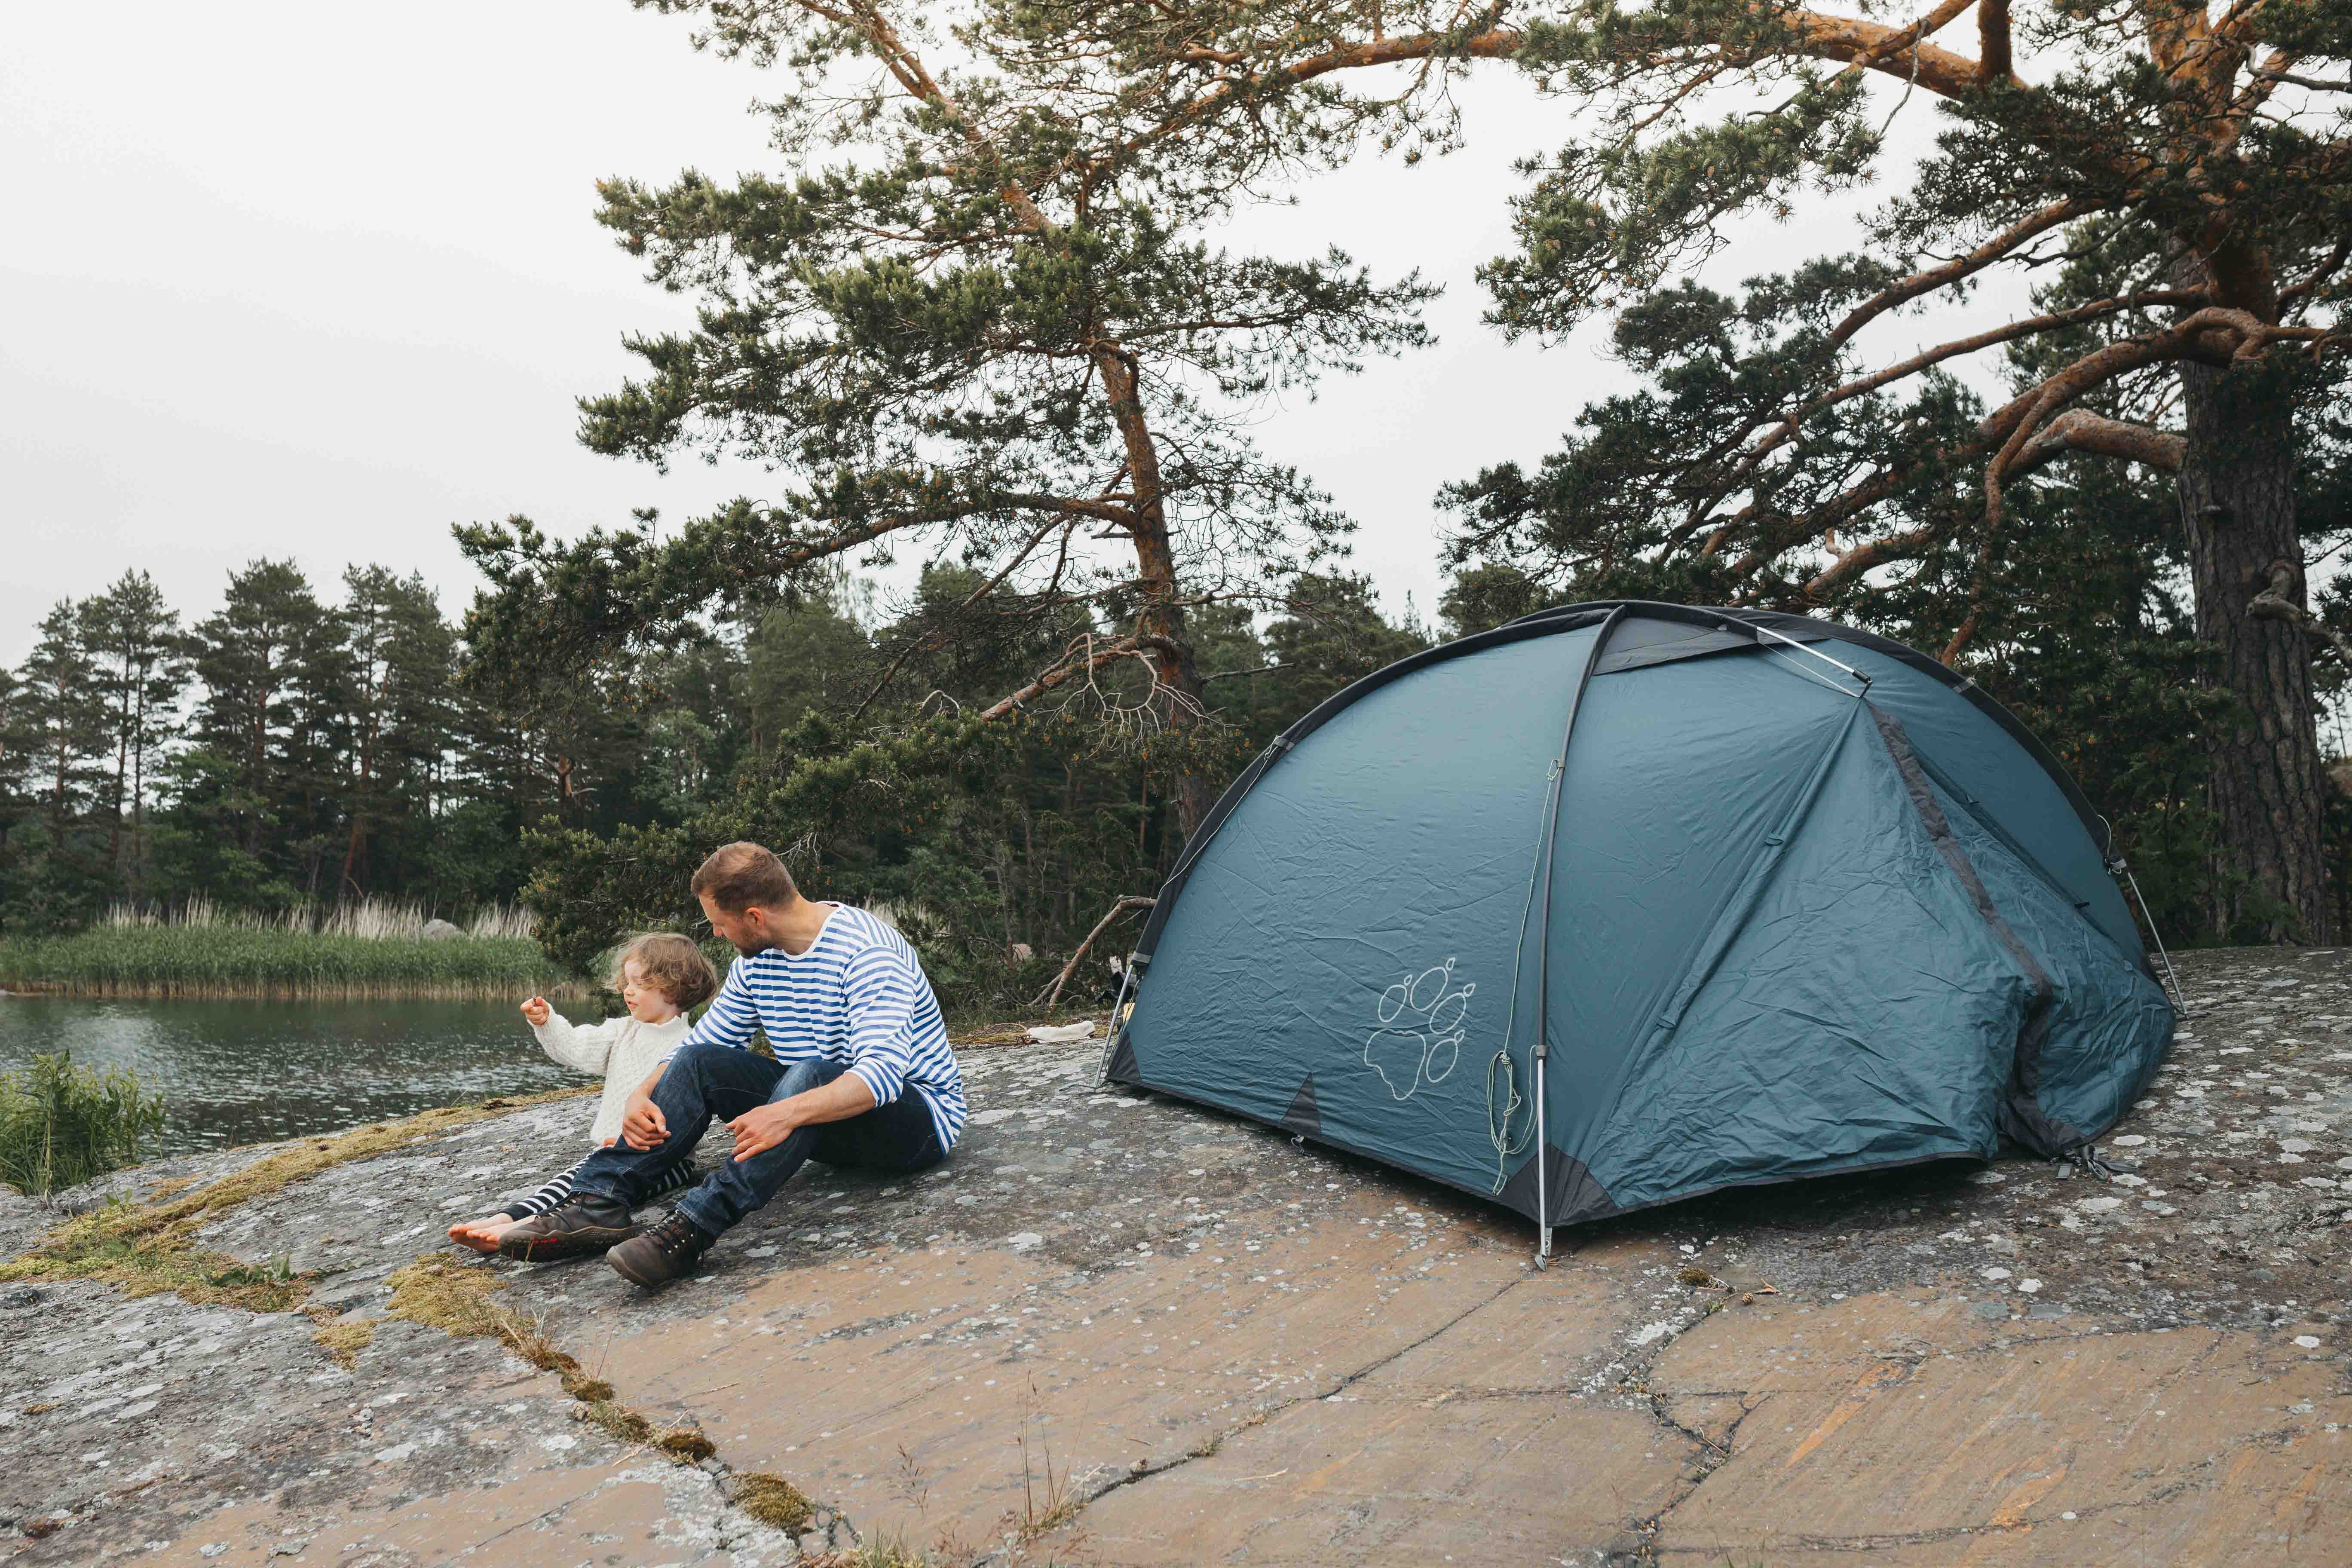 Child and father camping in Finland.